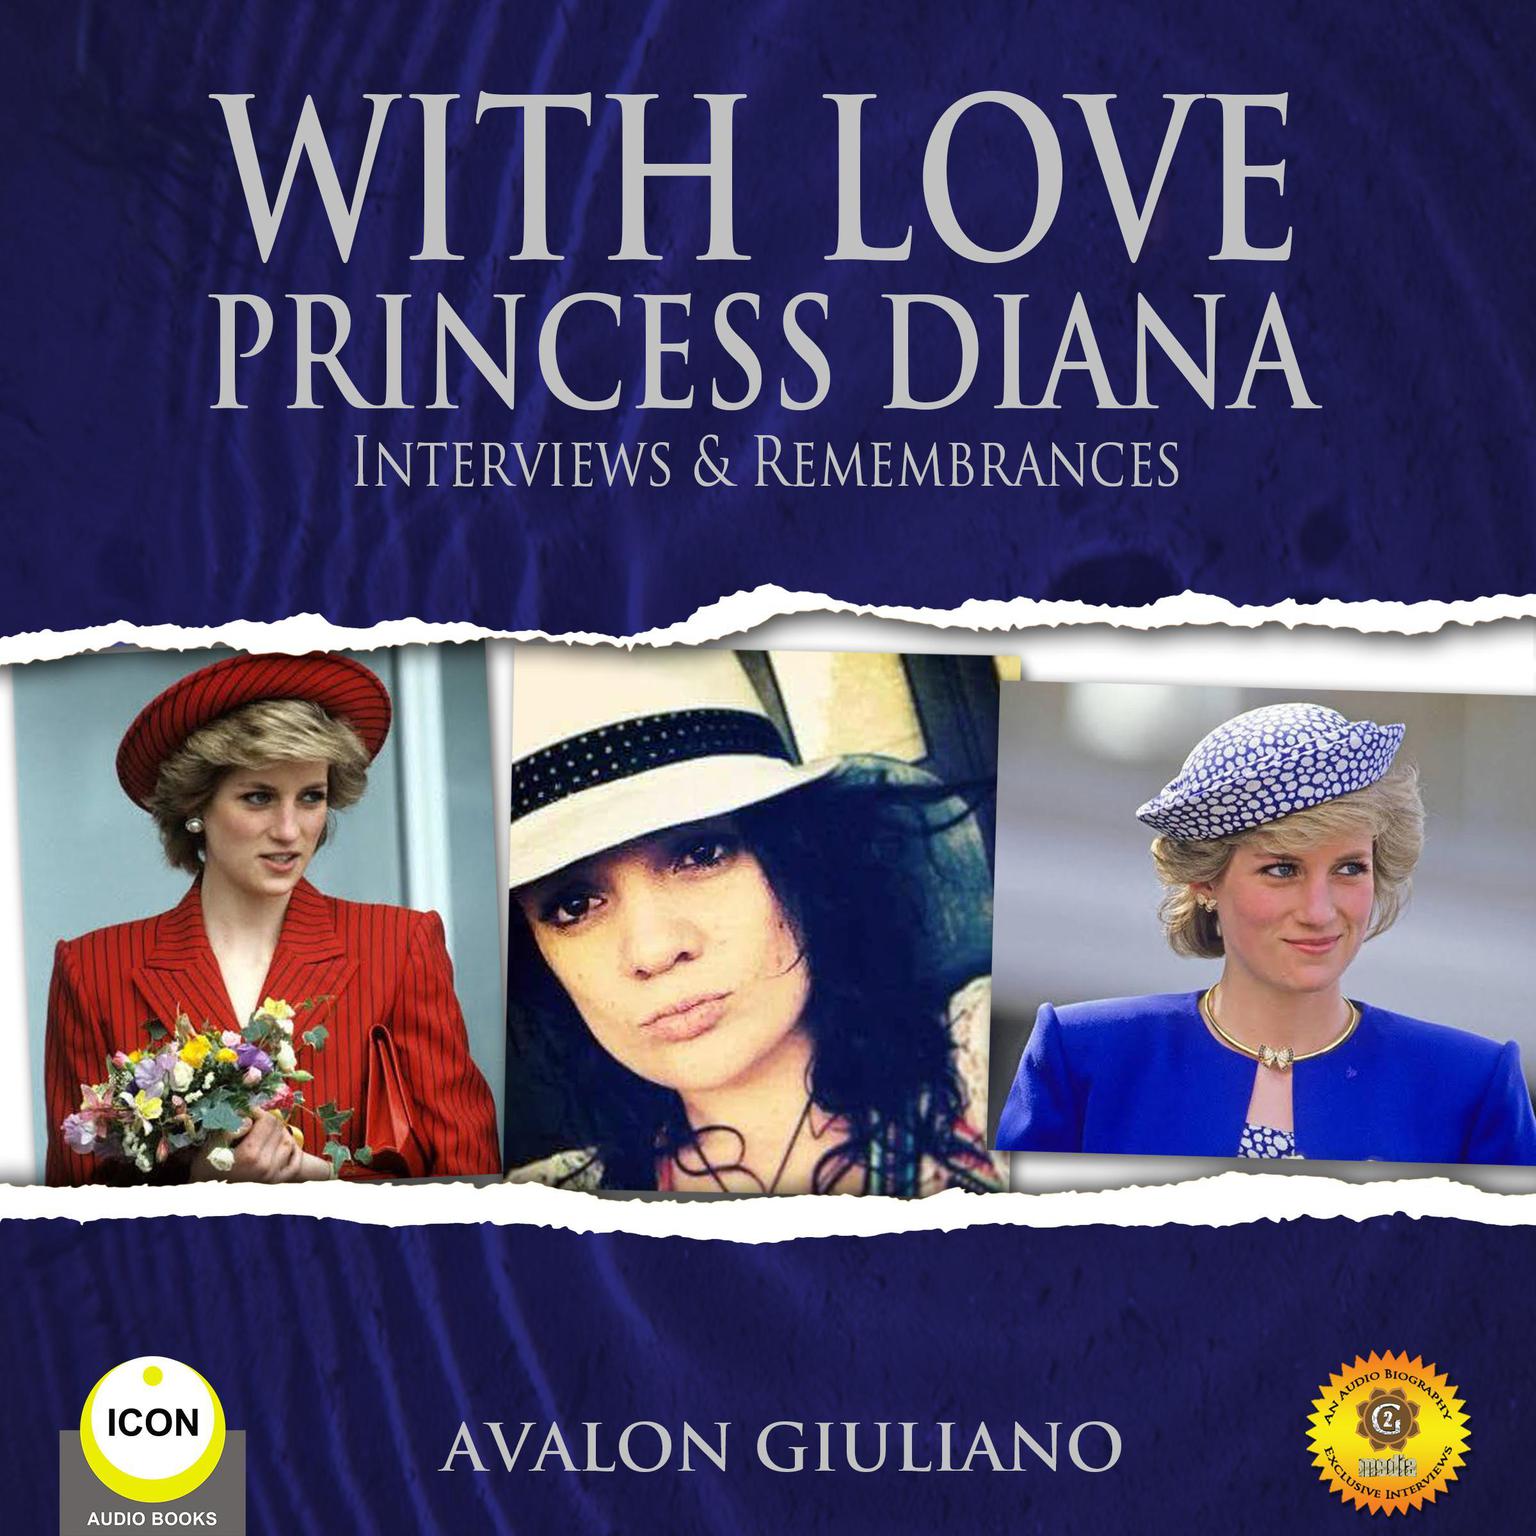 With Love Princess Diana - Interviews  Remembrances Audiobook, by Geoffrey Giuliano